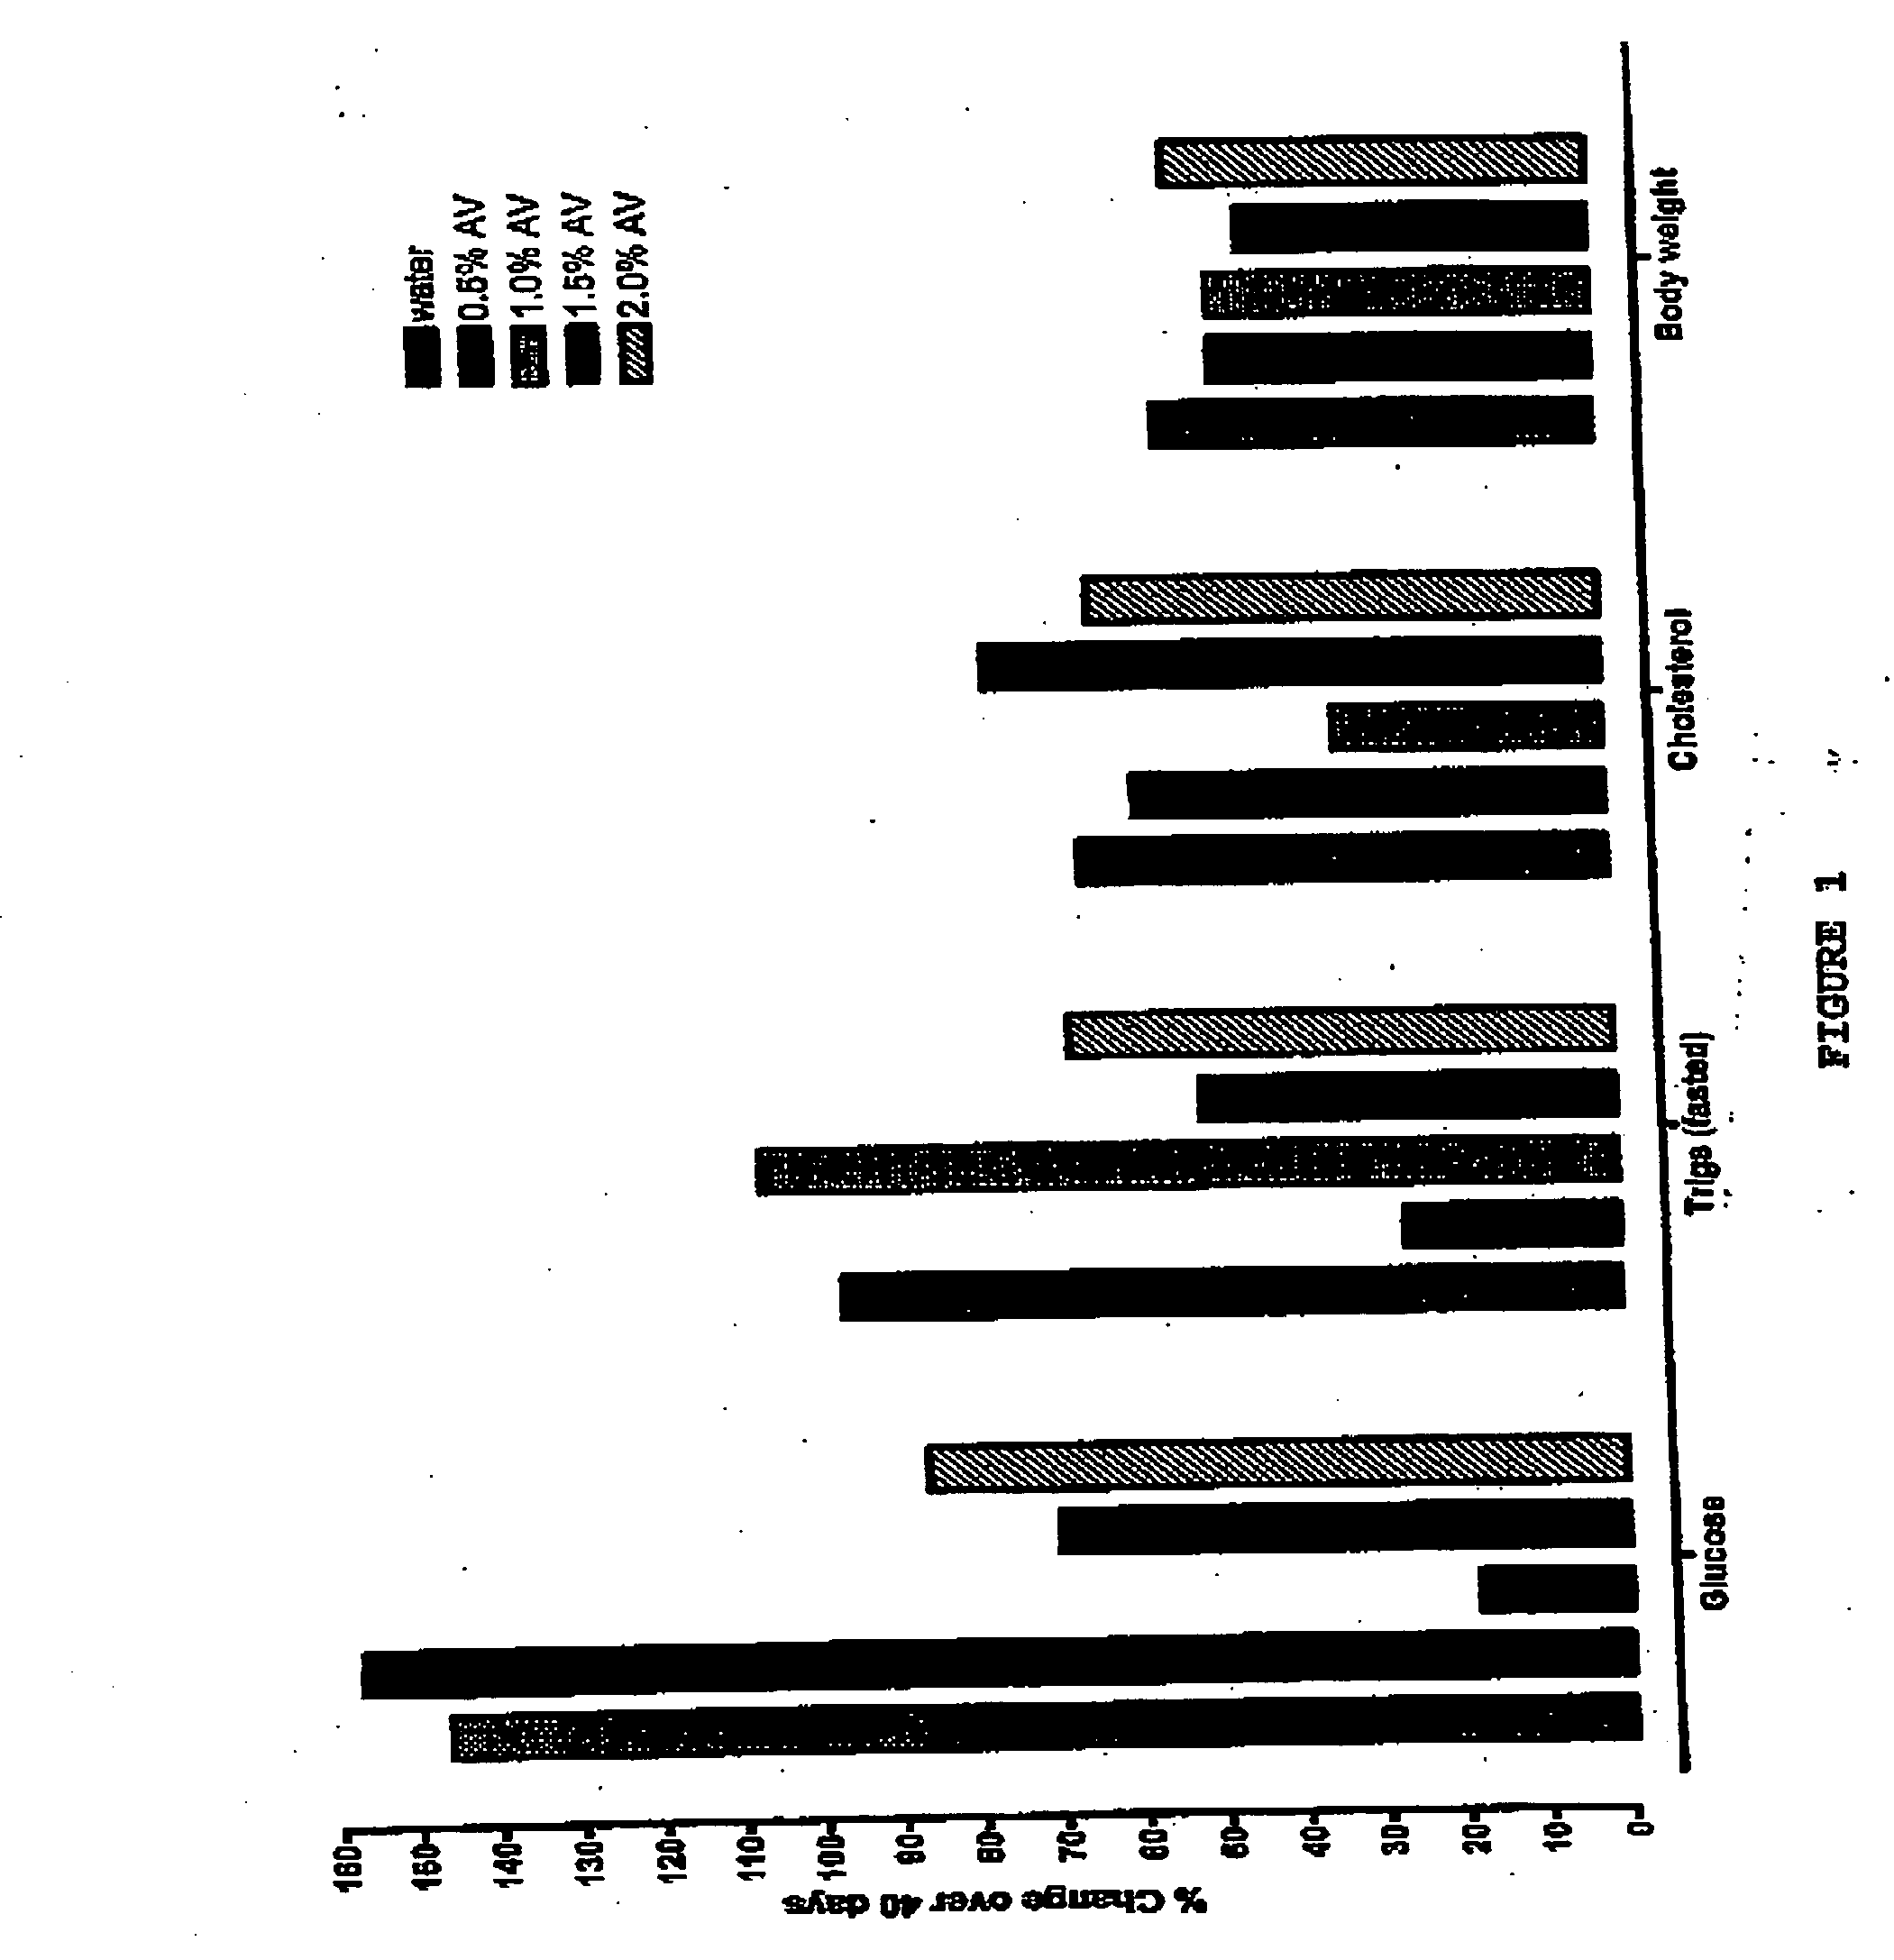 Method and composition for increasing the alkalinity of the body